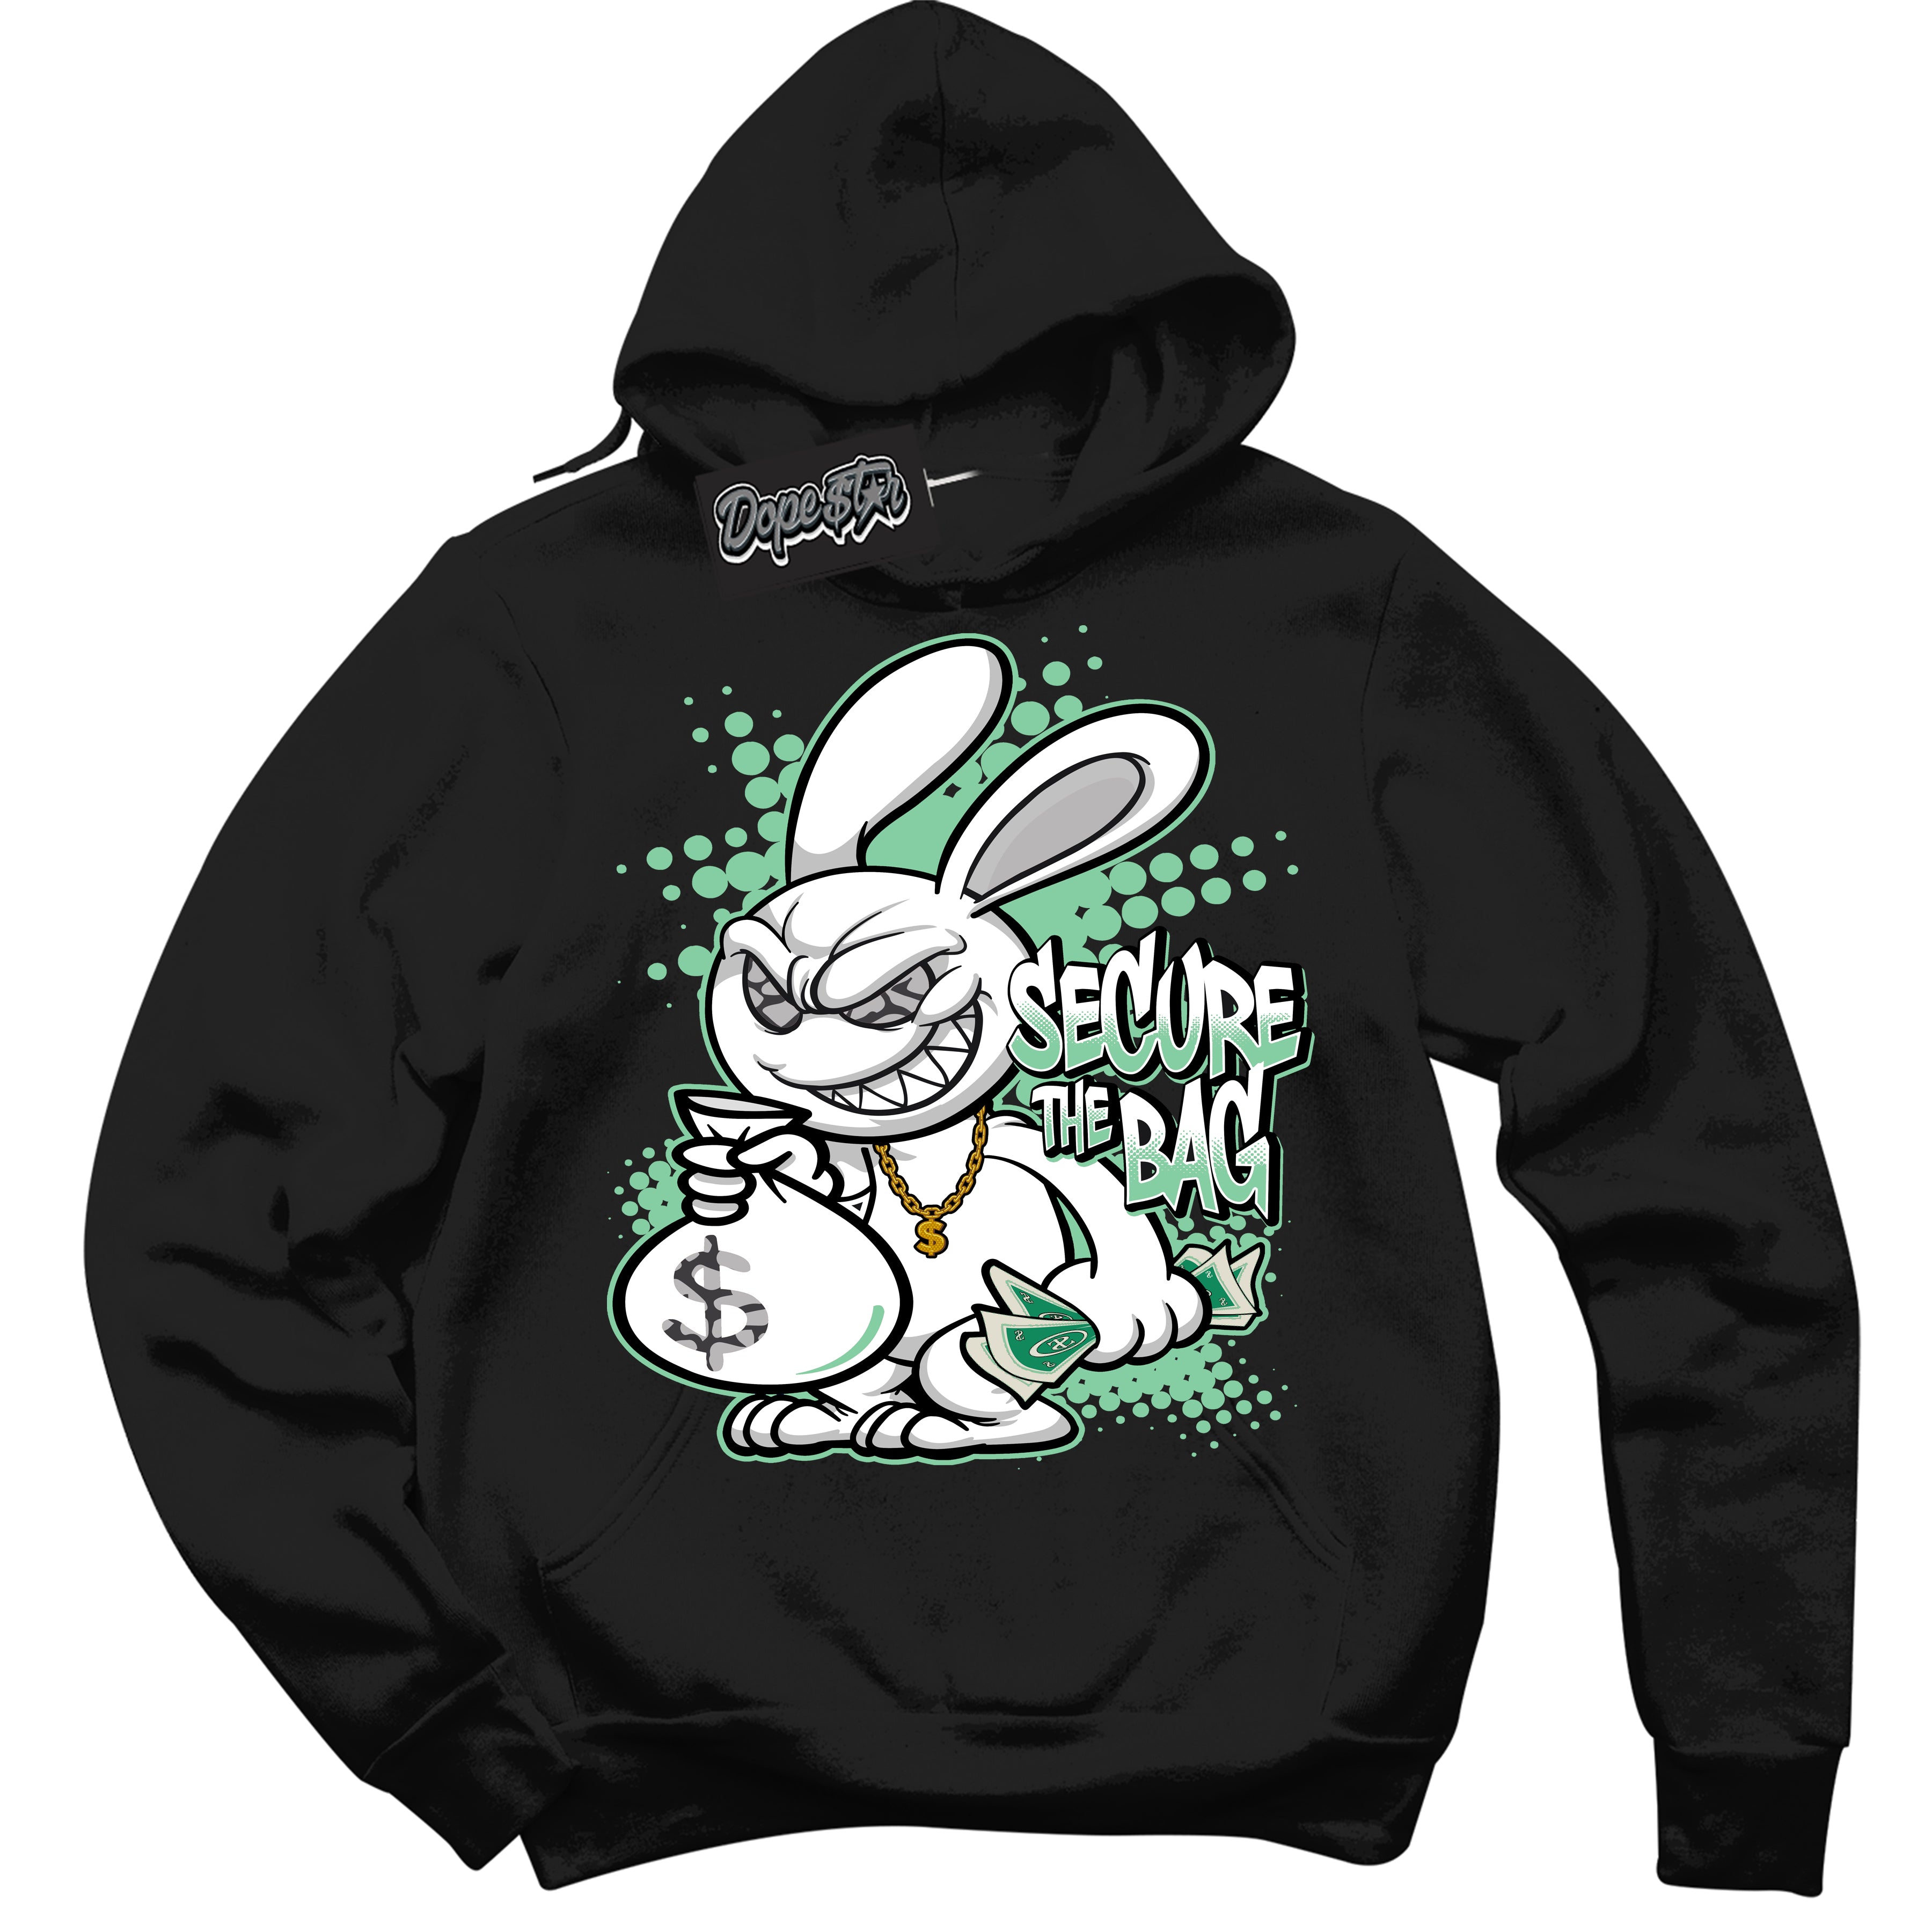 Cool Black Graphic DopeStar Hoodie with “ Secure The Bag “ print, that perfectly matches Green Glow 3S sneakers